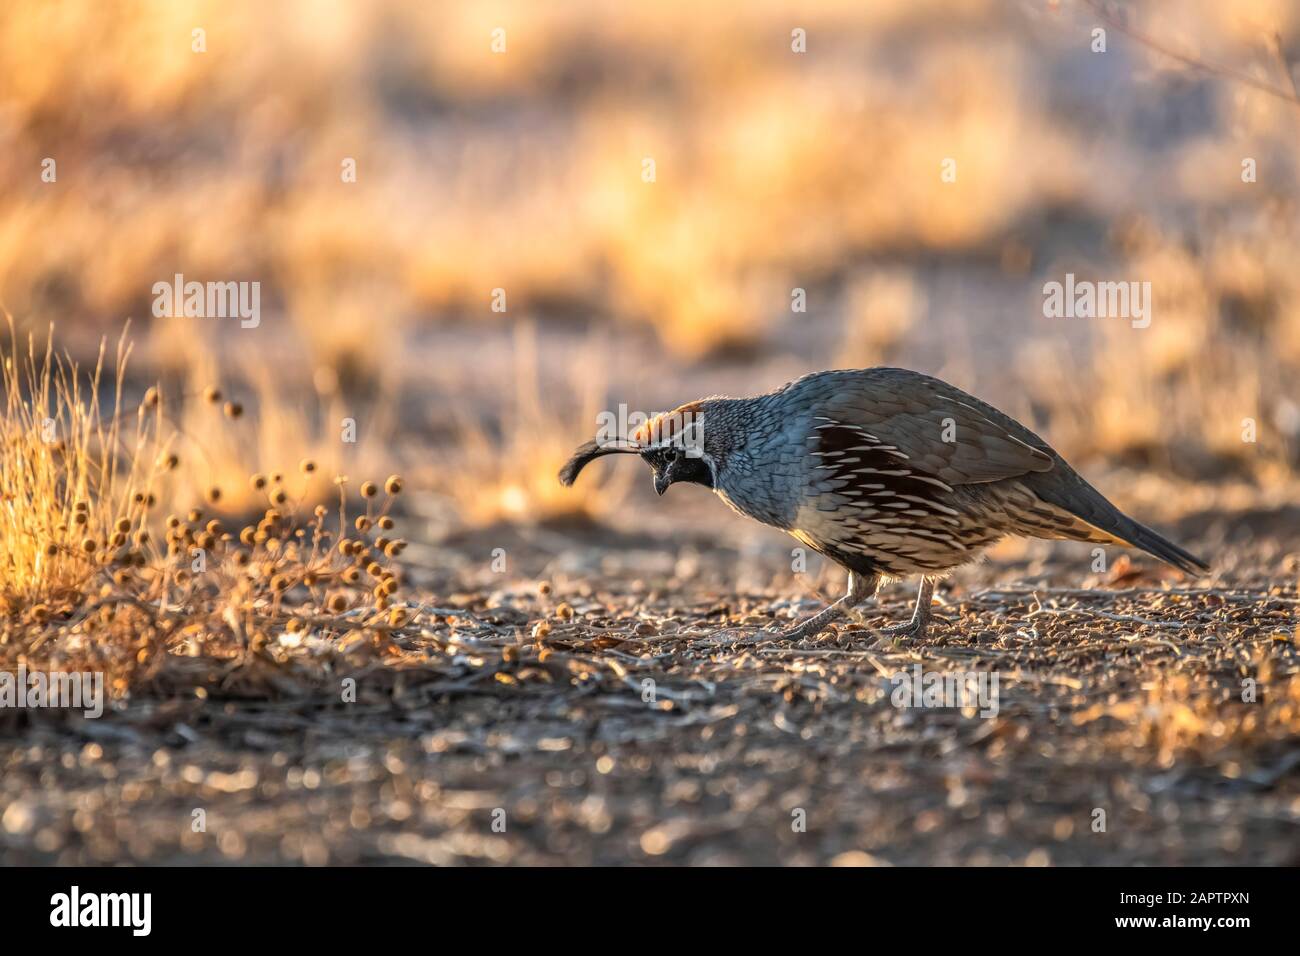 Male Gambel's Quail (Callipepla gamibelli) showing two head plumes searching for food on ground; Casa Grande, Arizona, United States of America Stock Photo